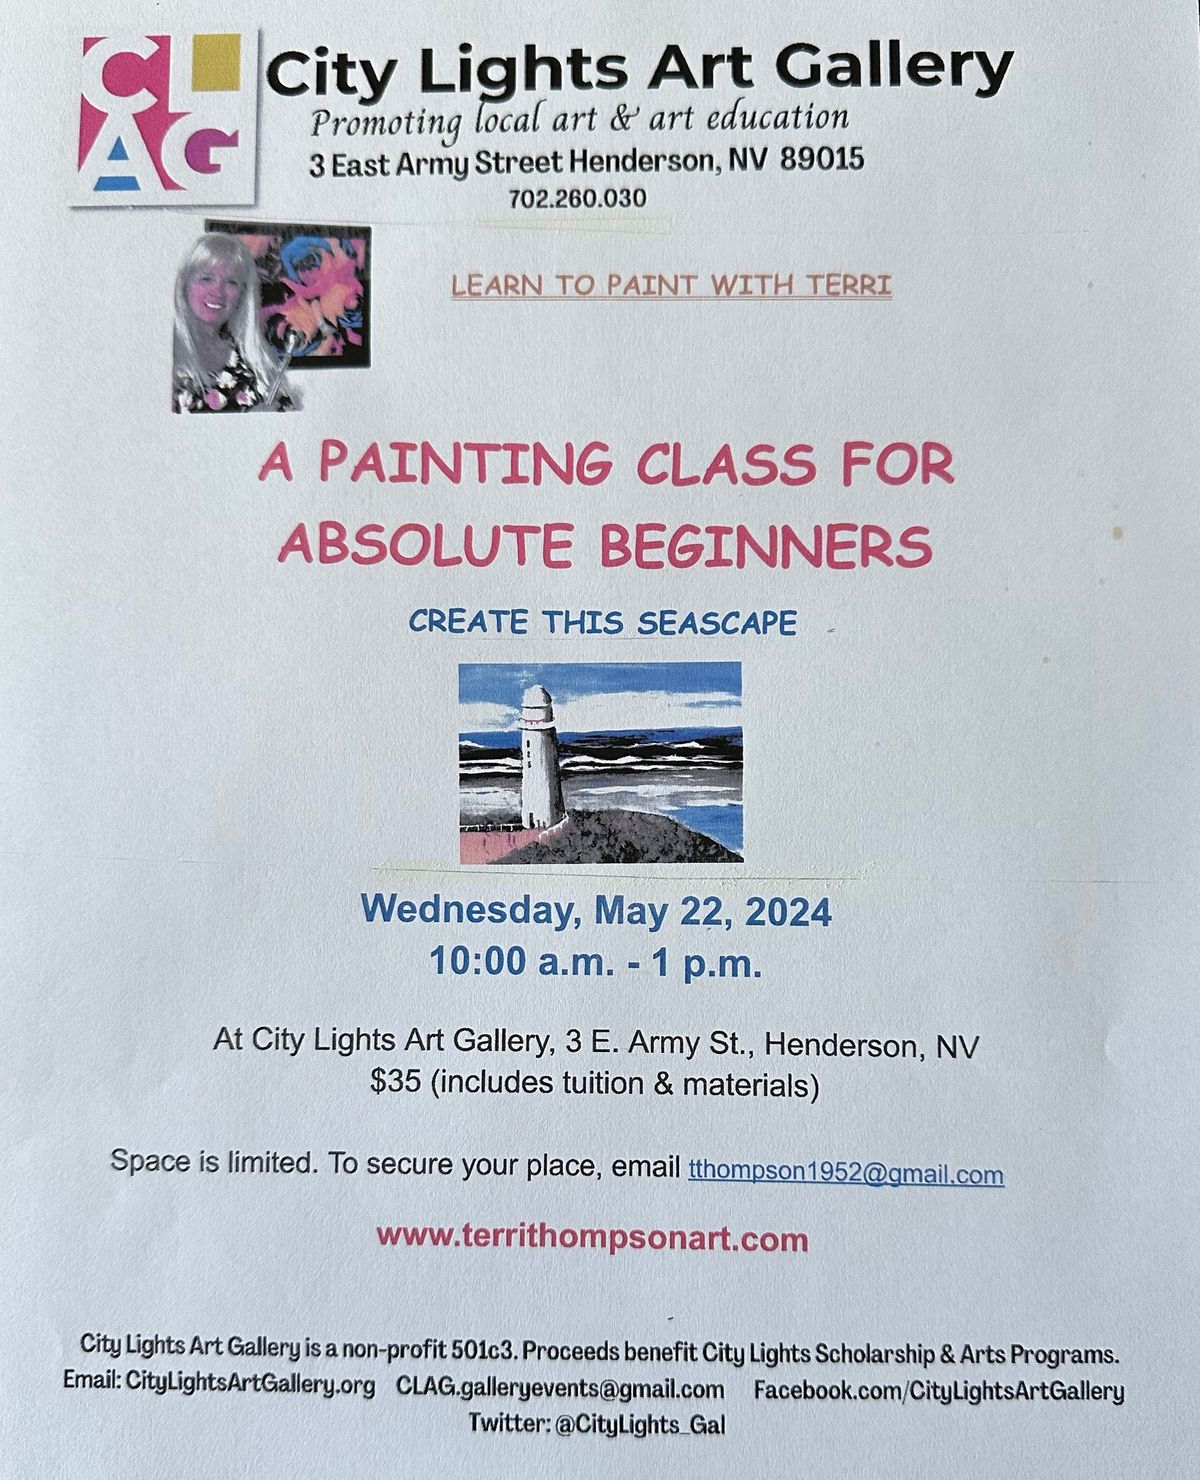 A Painting For Absolute Beginners with Terri Thompson